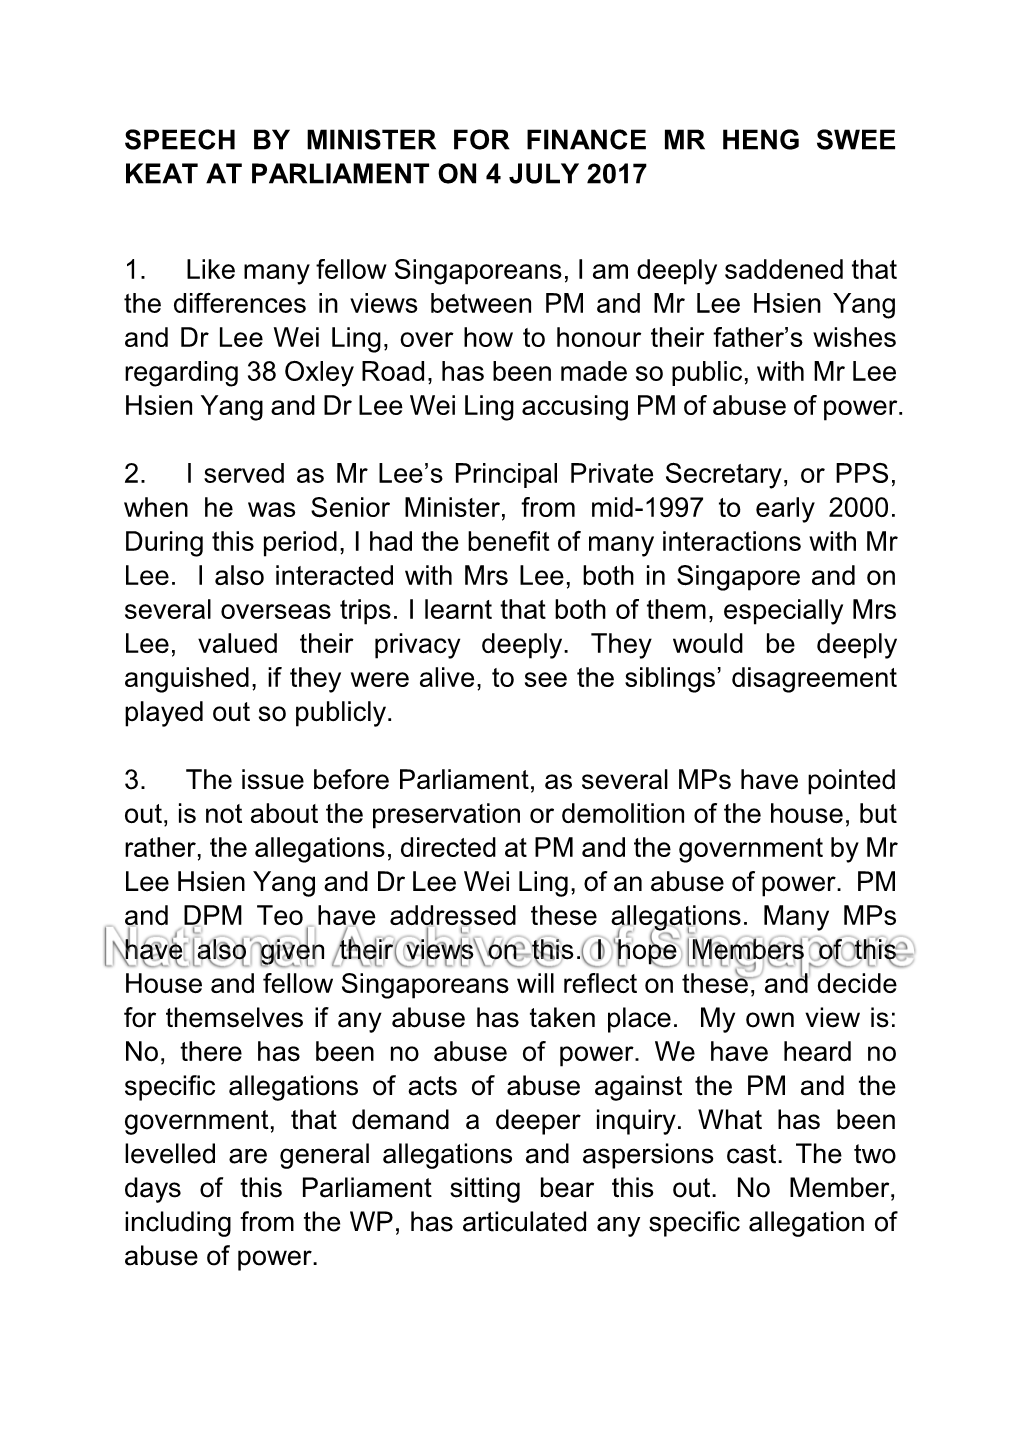 Speech by Minister for Finance Mr Heng Swee Keat at Parliament on 4 July 2017